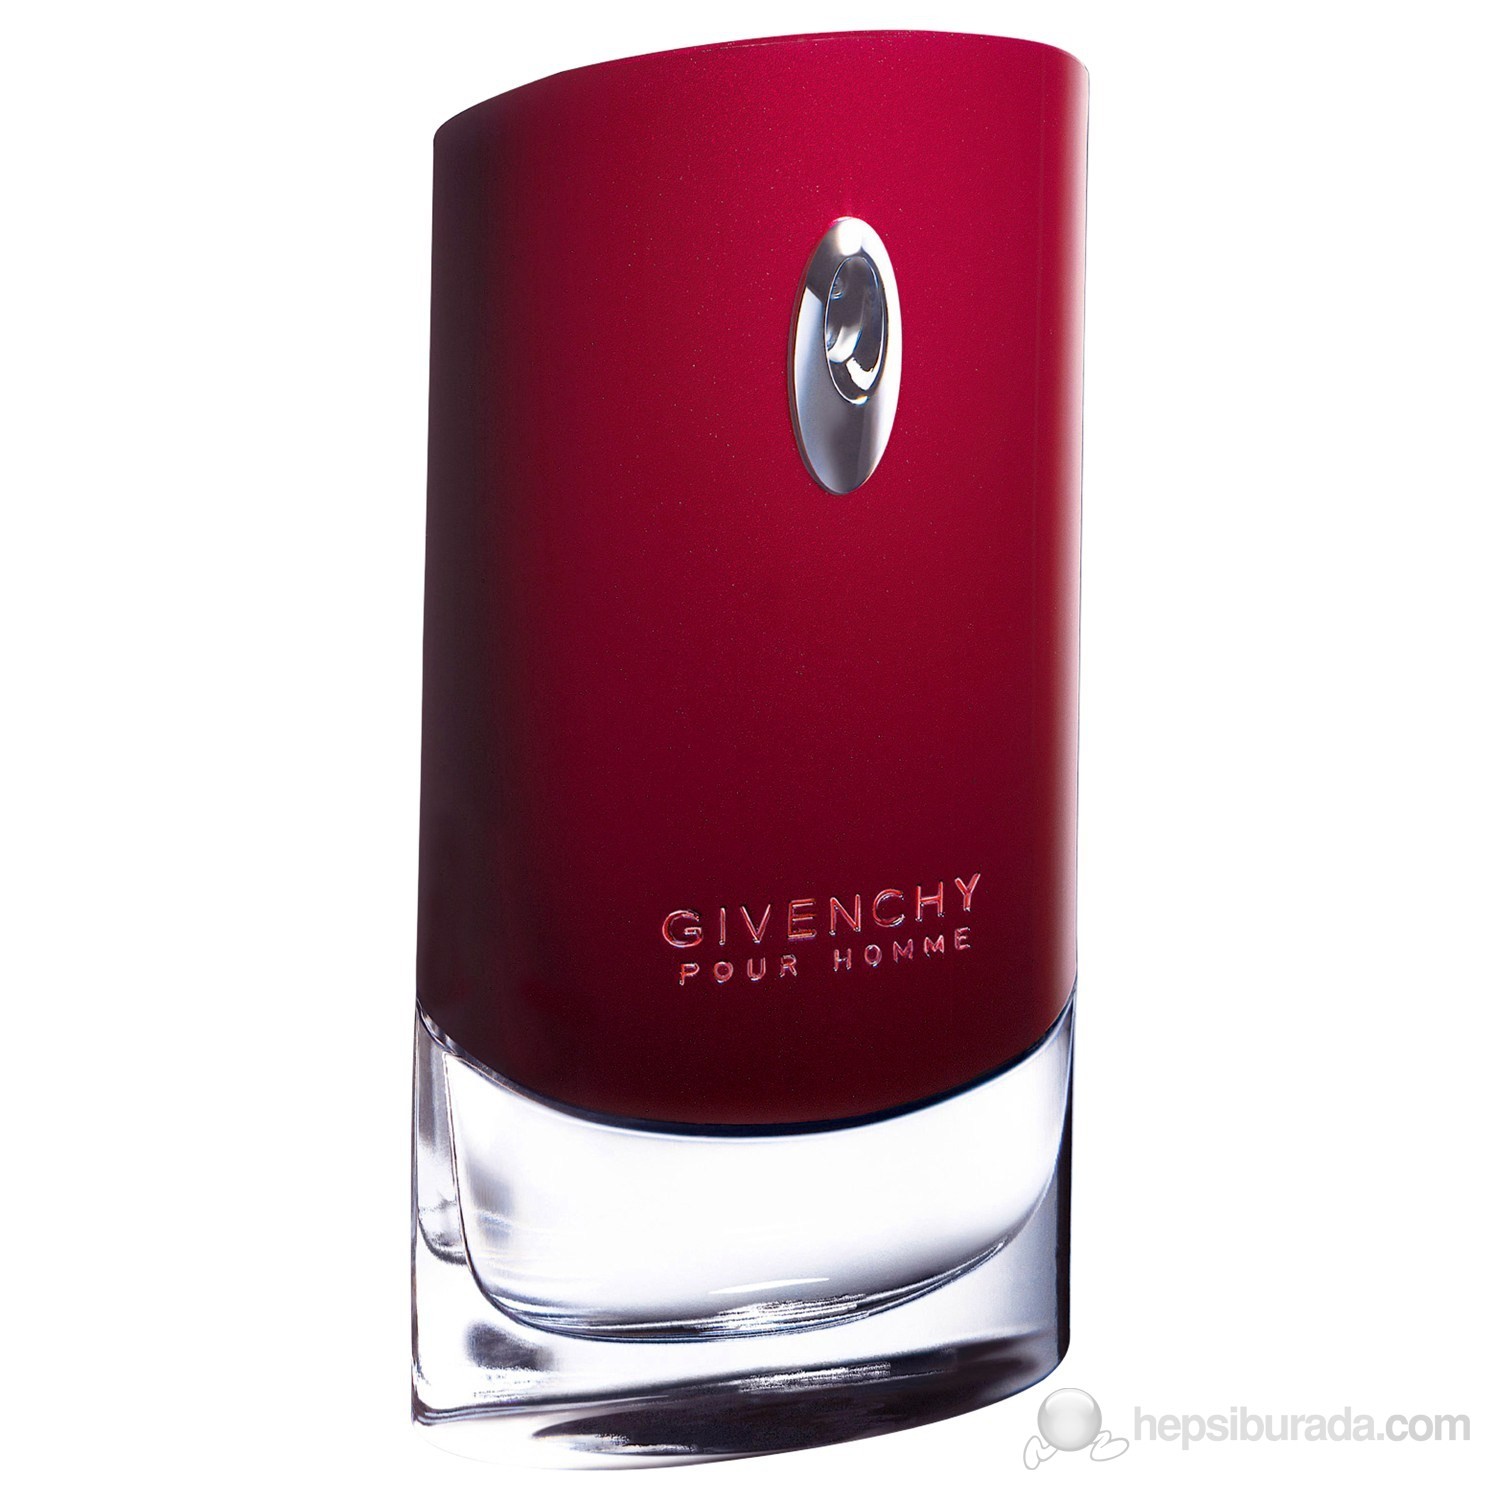 Givenchy pour homme 100. Givenchy "pour homme" EDT, 100ml. Givenchy pour homme Givenchy. Givenchy Givenchy pour homme, 100 ml. Givenchy pour homme Red.